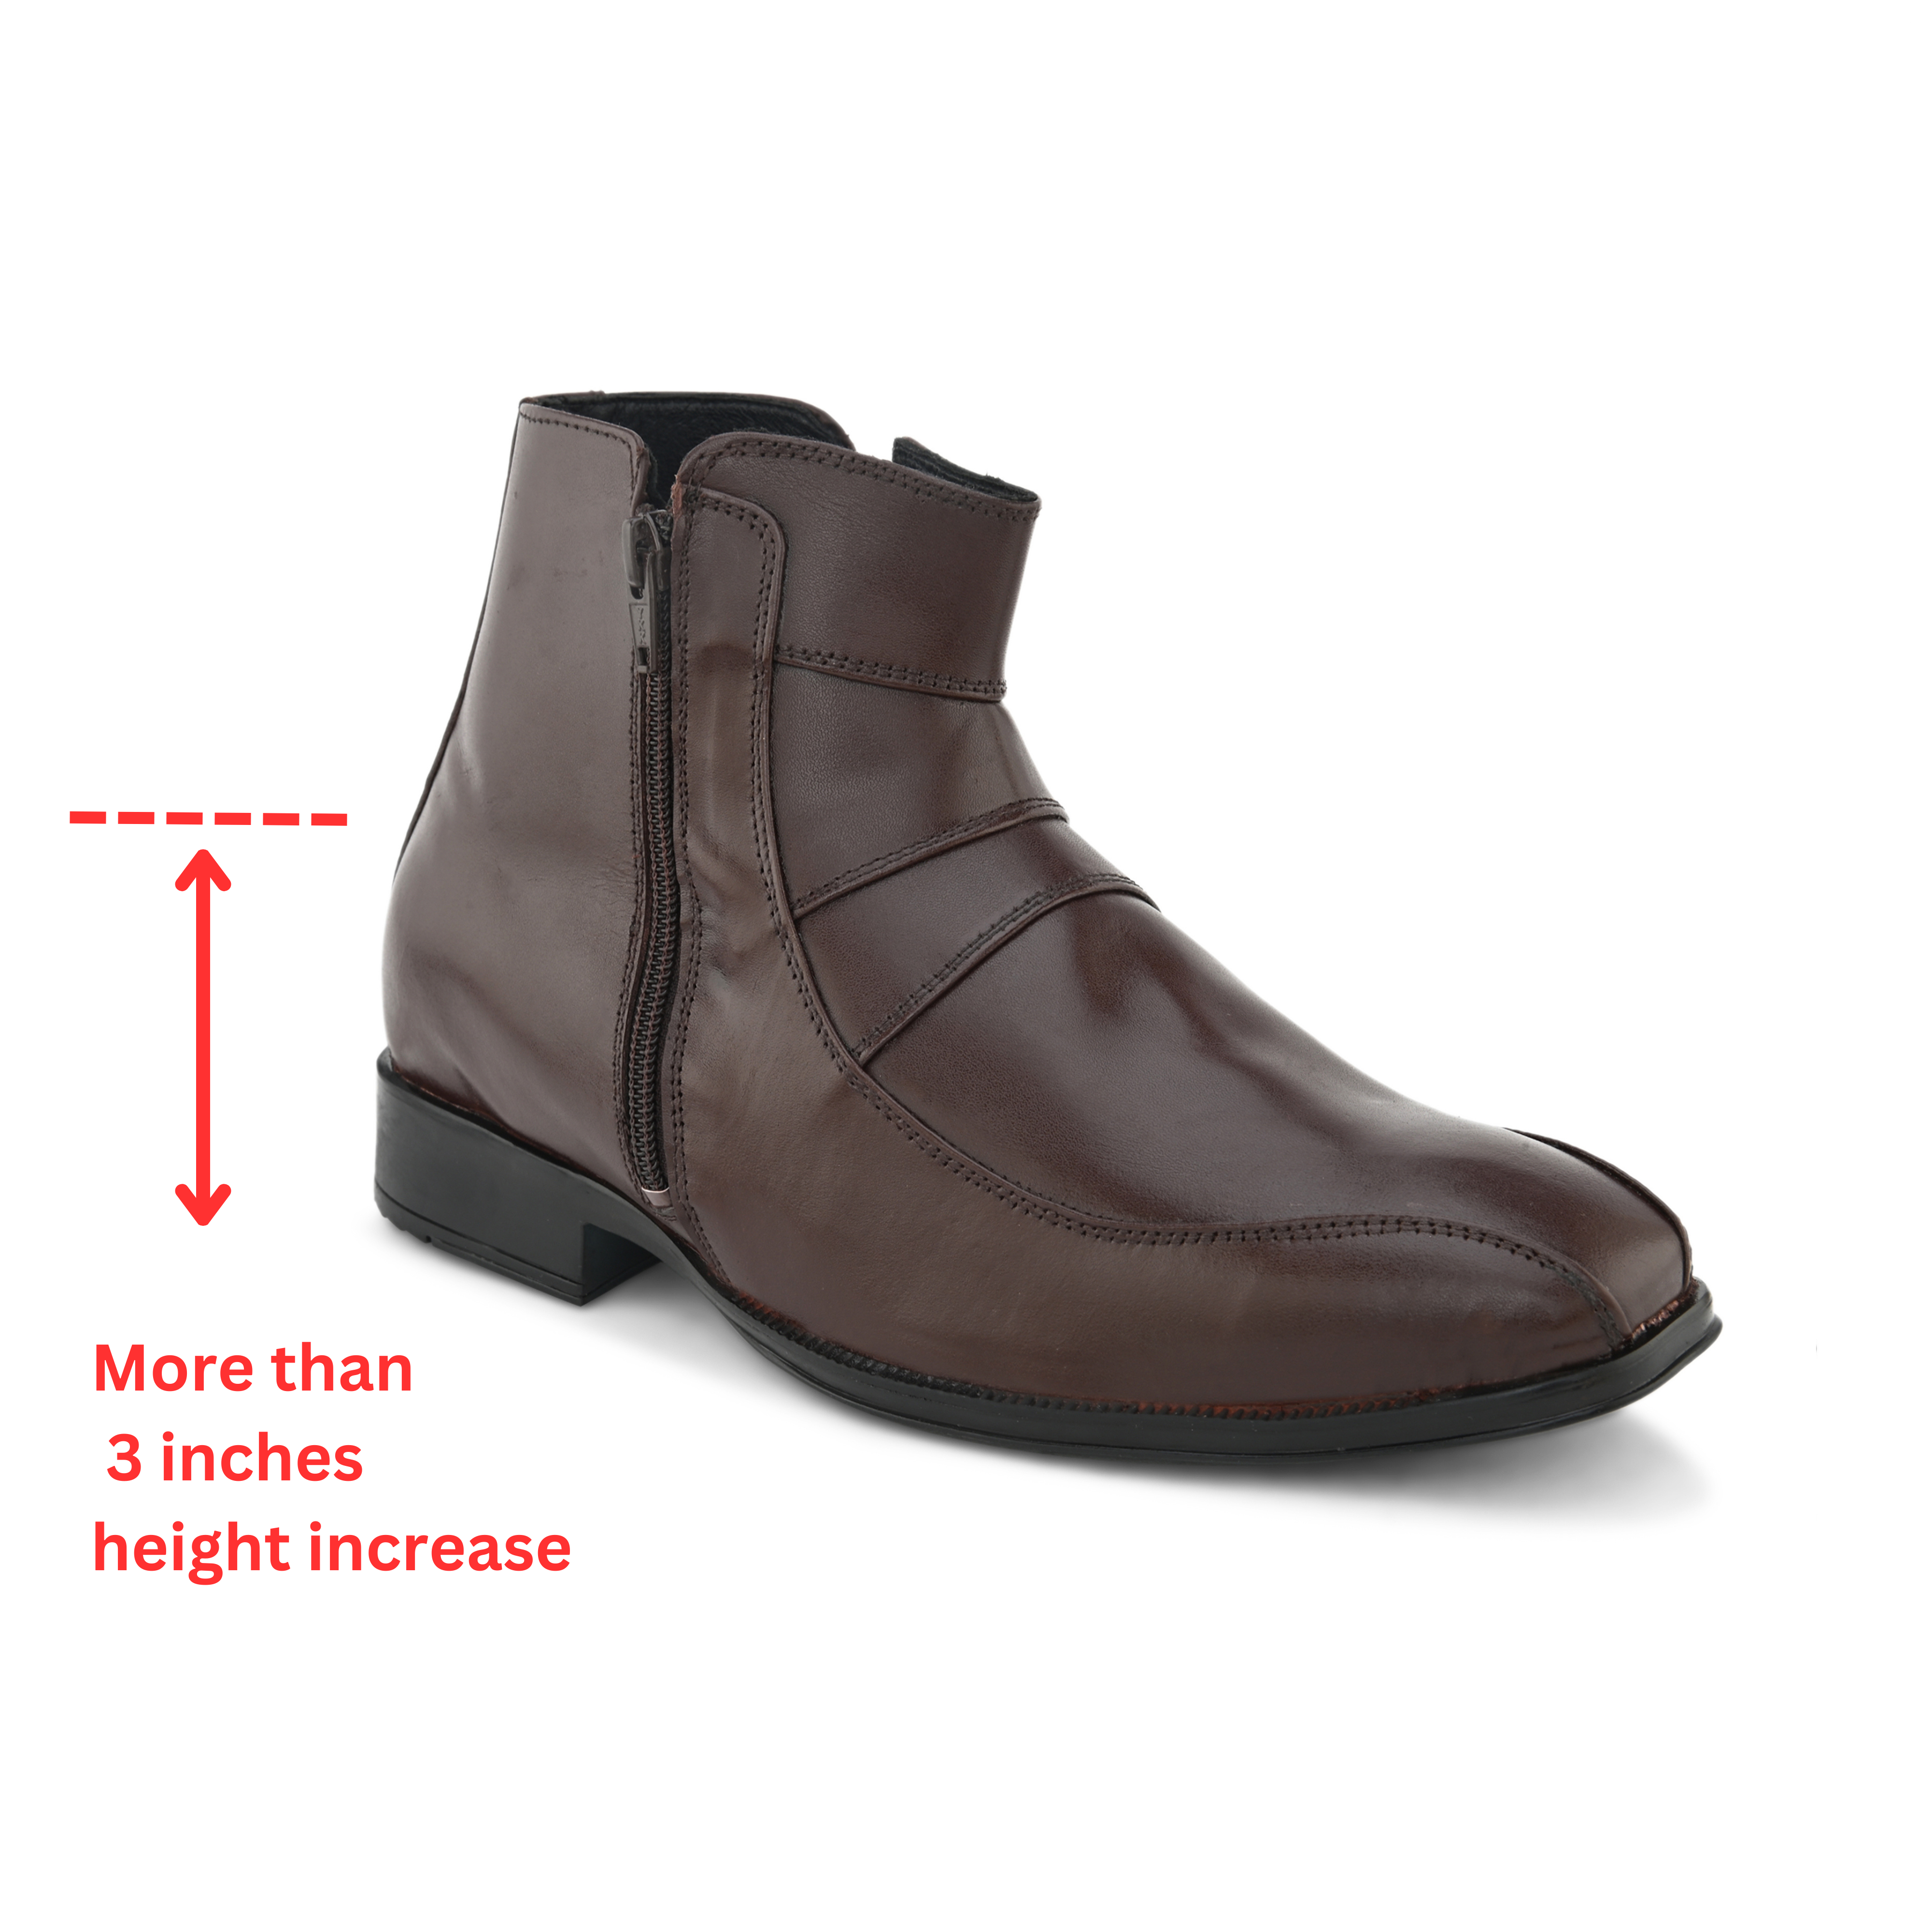 men's shoes for height